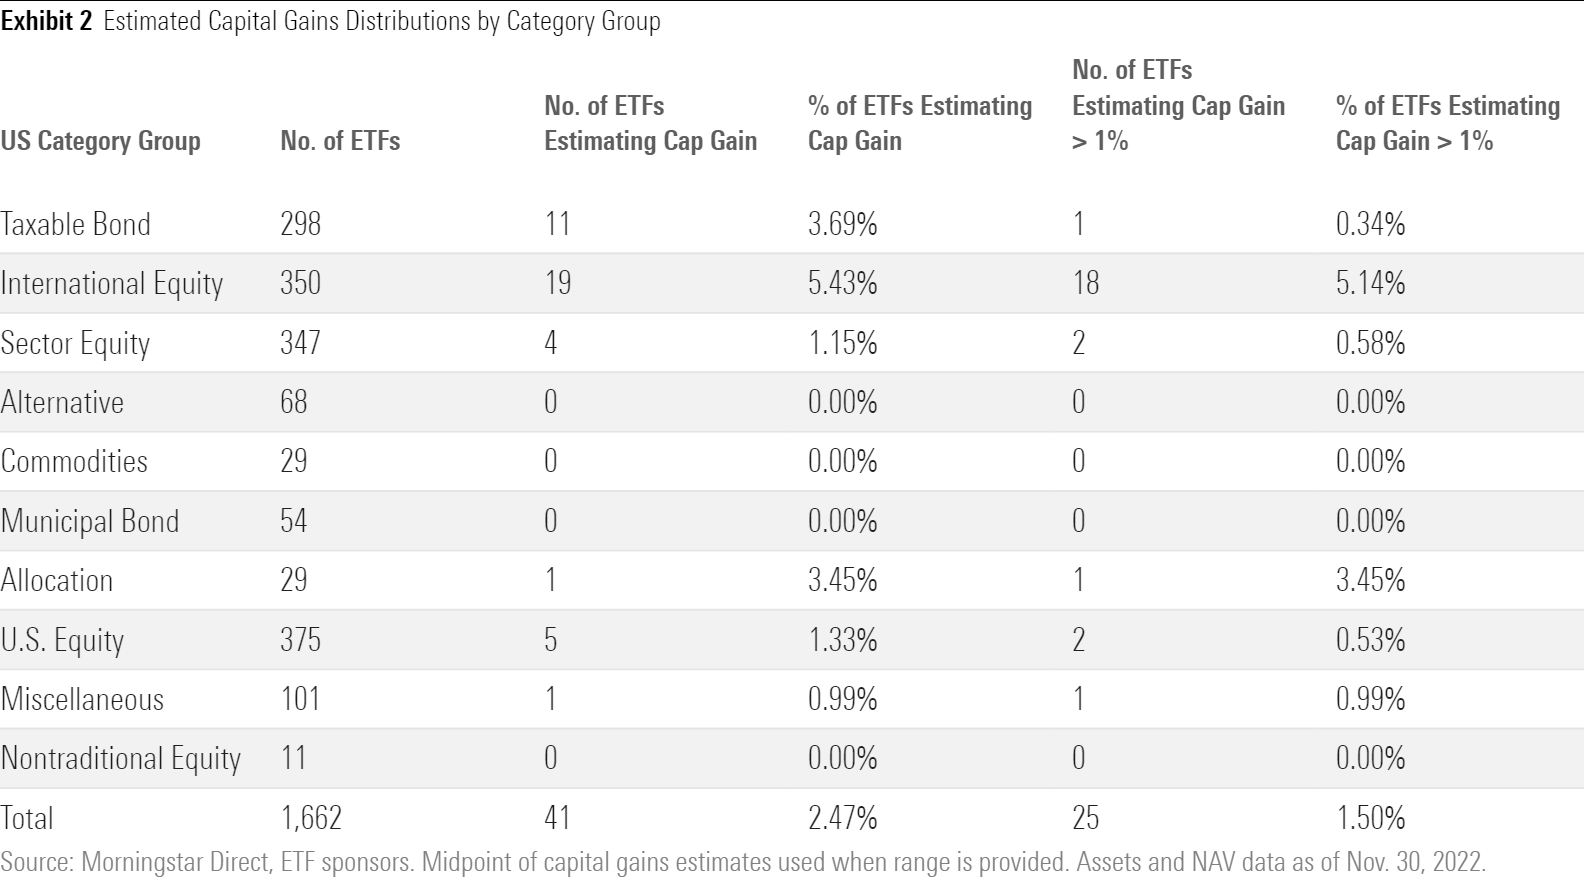 A table of the estimated capital gains distributions across ETFs' respective category groups.